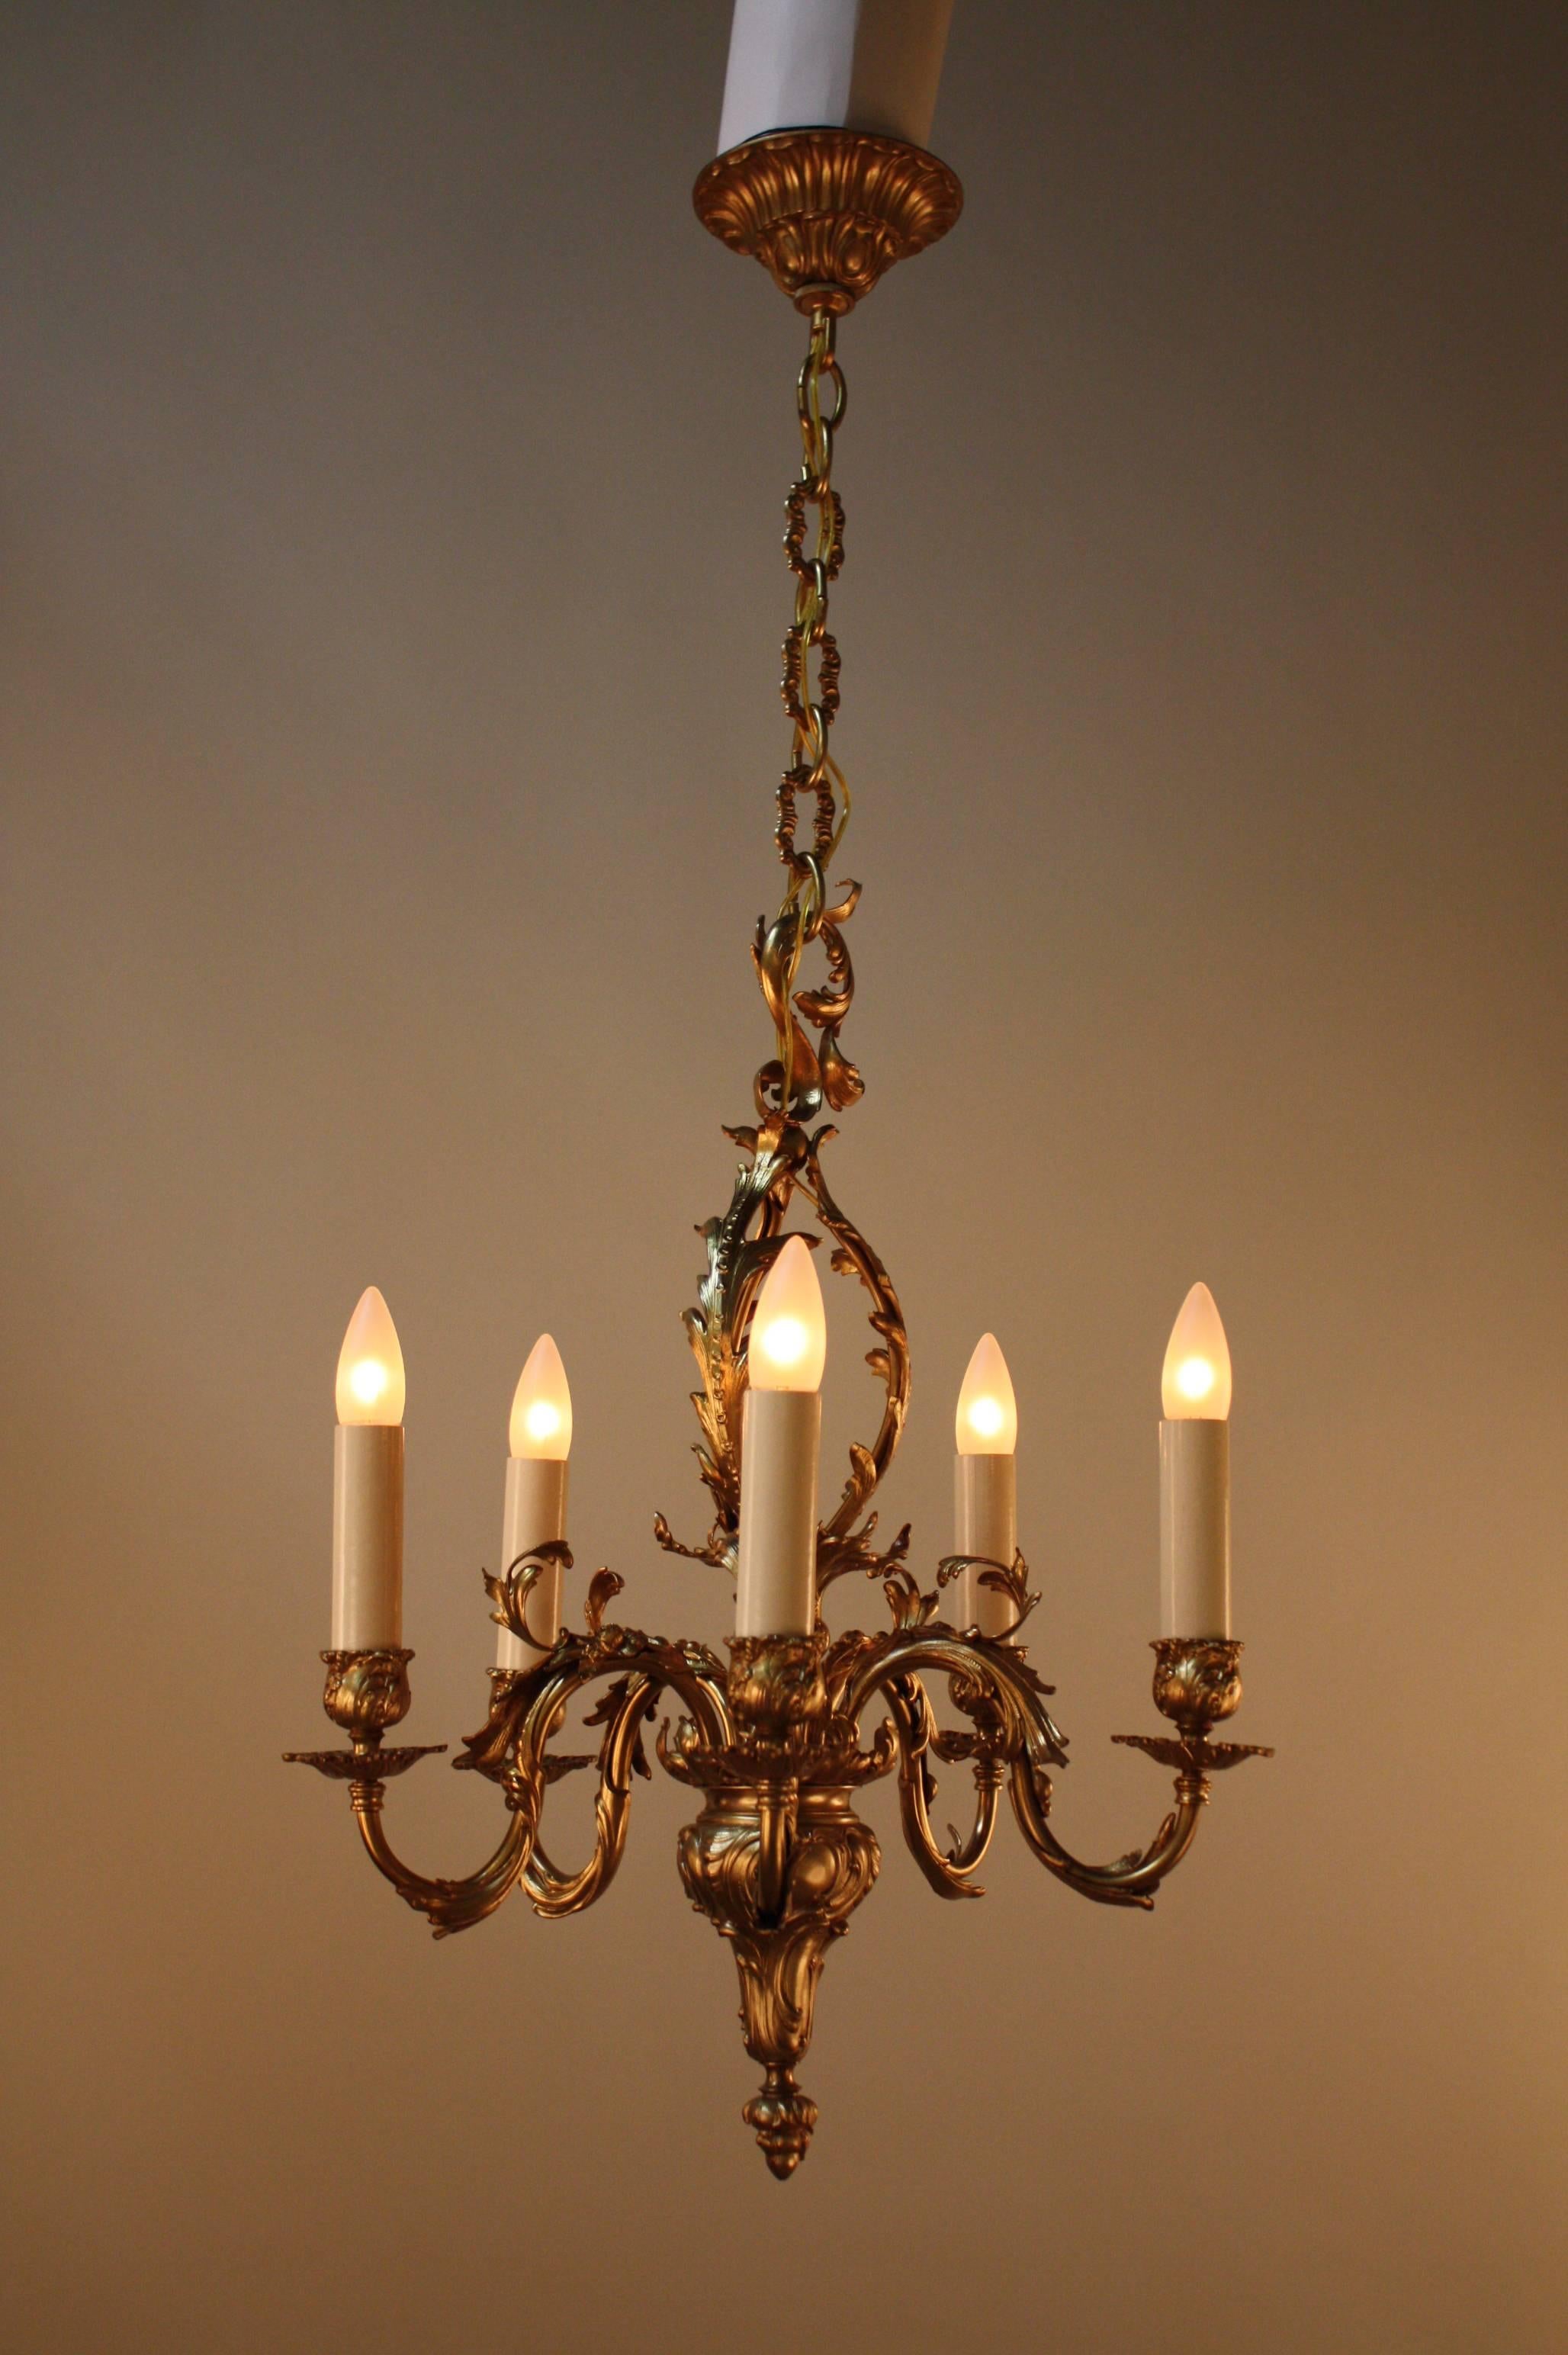 Made in France during the early 20th century, this five-light chandelier features beautiful bronze work. Elegant, intricately crafted details adorn this chandelier from top to bottom.